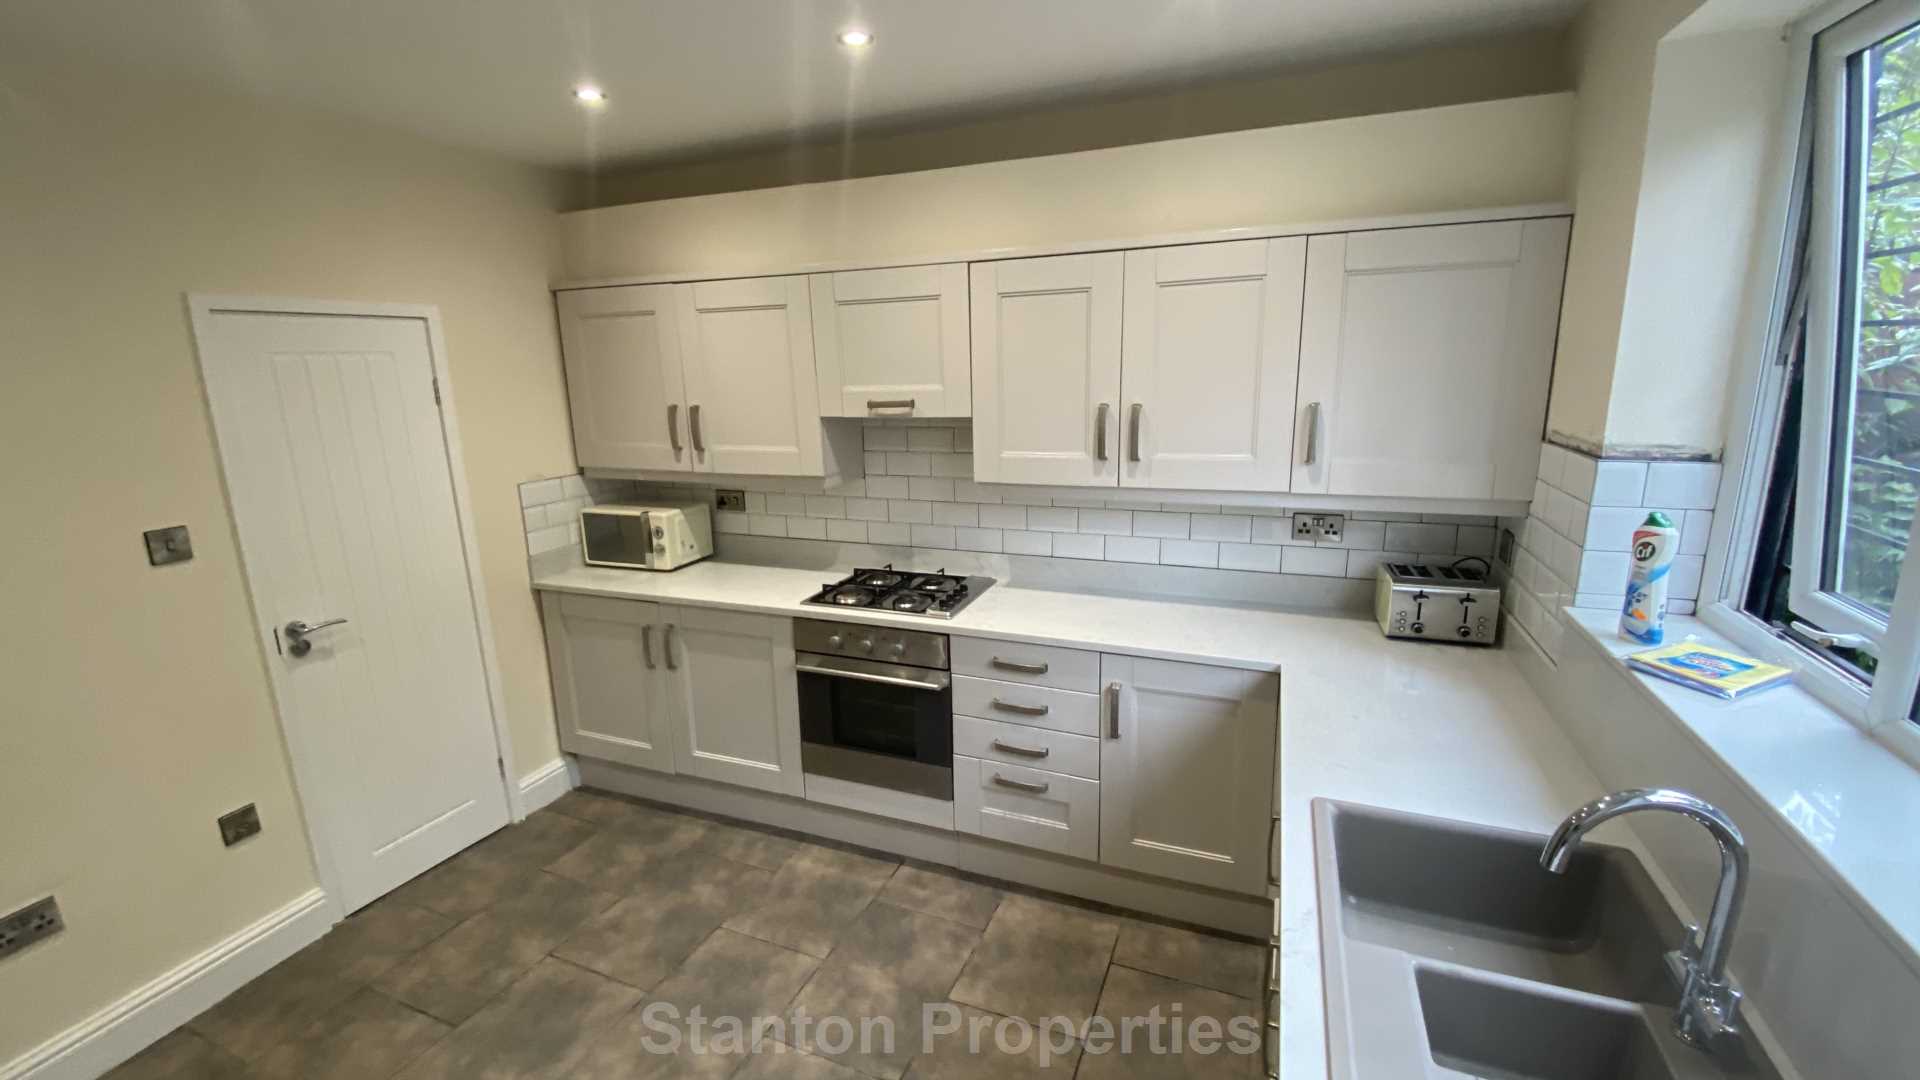 £130 pppw, Moseley Road, Fallowfield, M14 6NR, Image 4